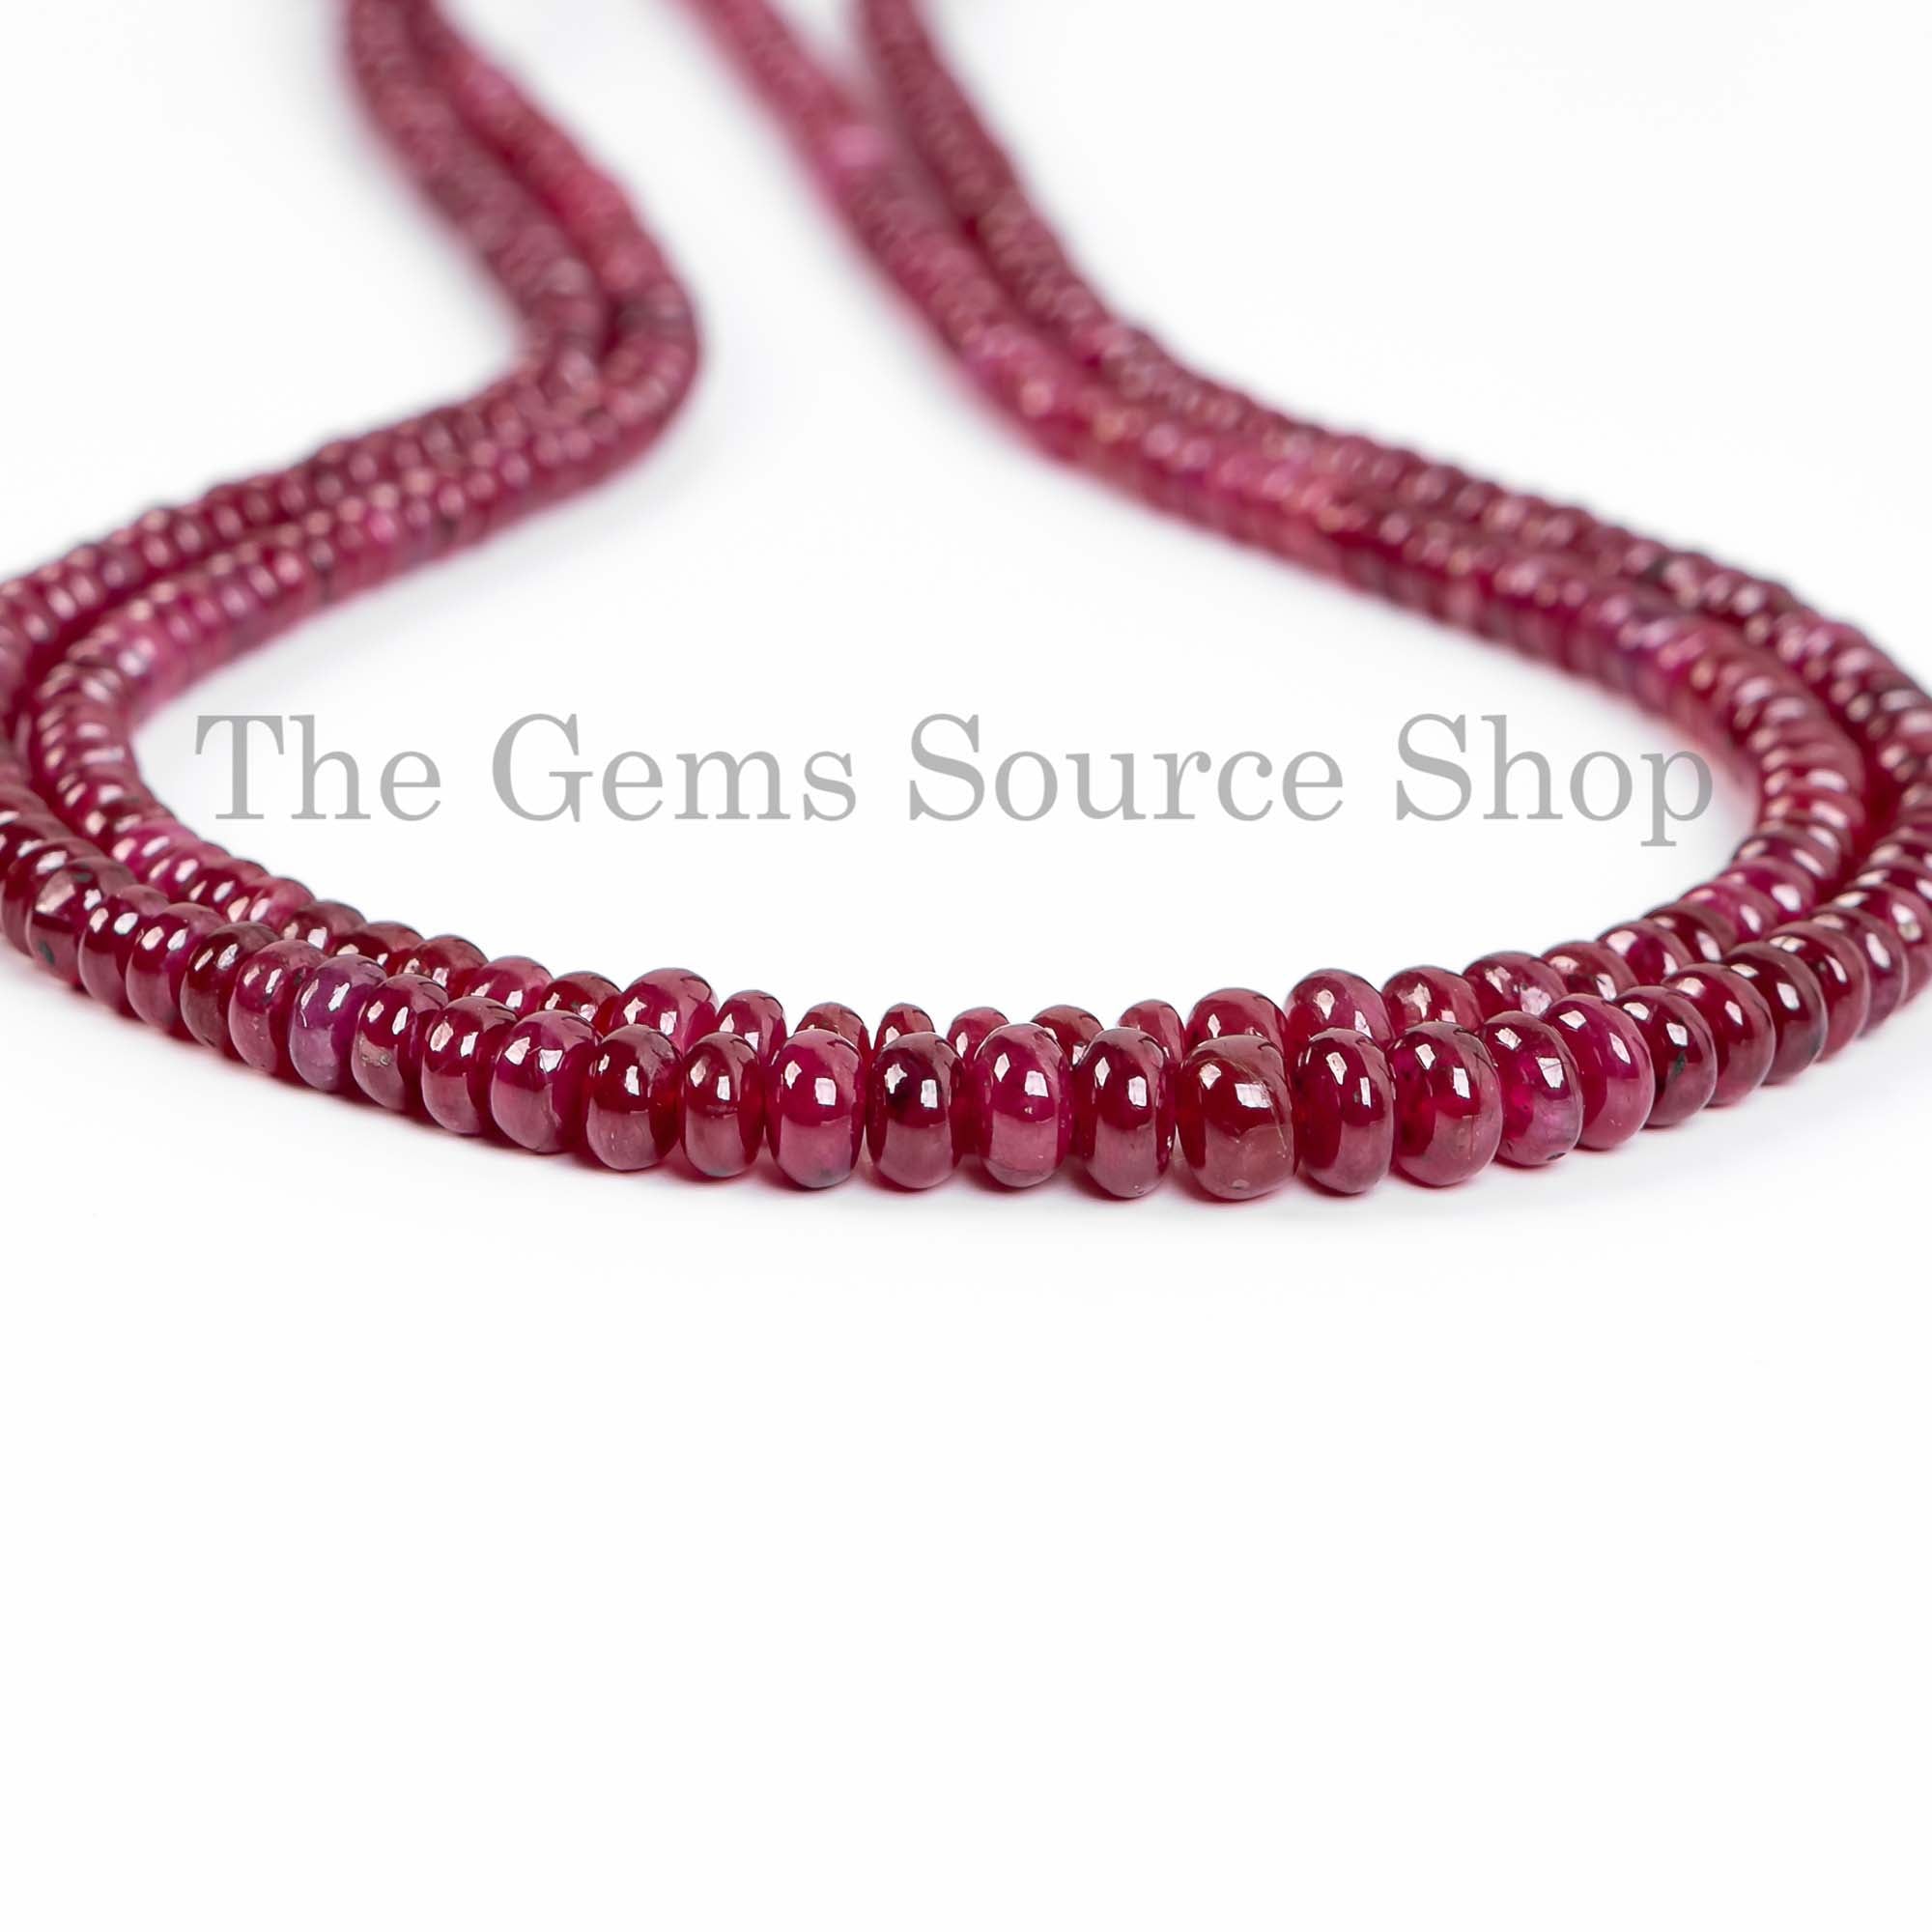 Ruby Smooth Necklace, Beads Necklace, AAA Quality Ruby Necklace, Rondelle Necklace